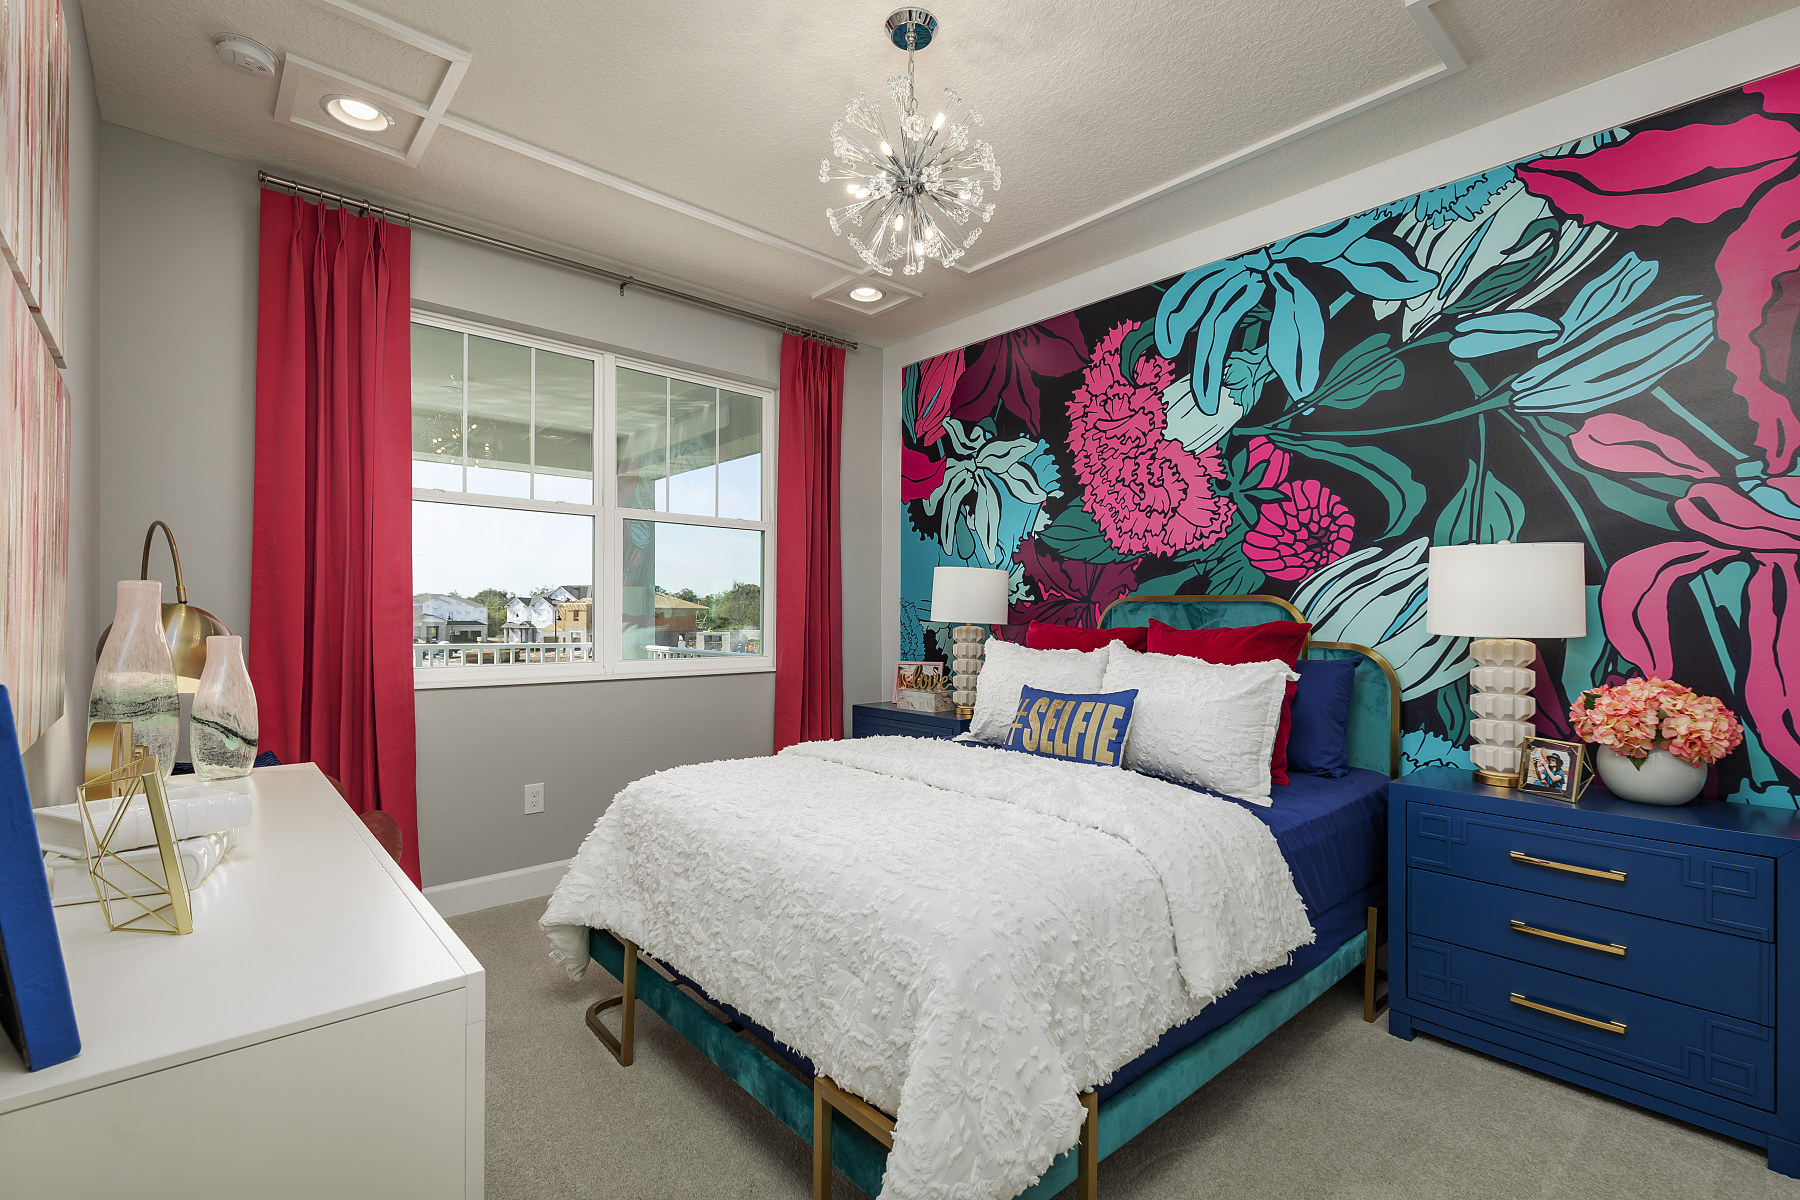 Bedroom With Bright Colors and Tropical Wallpaper